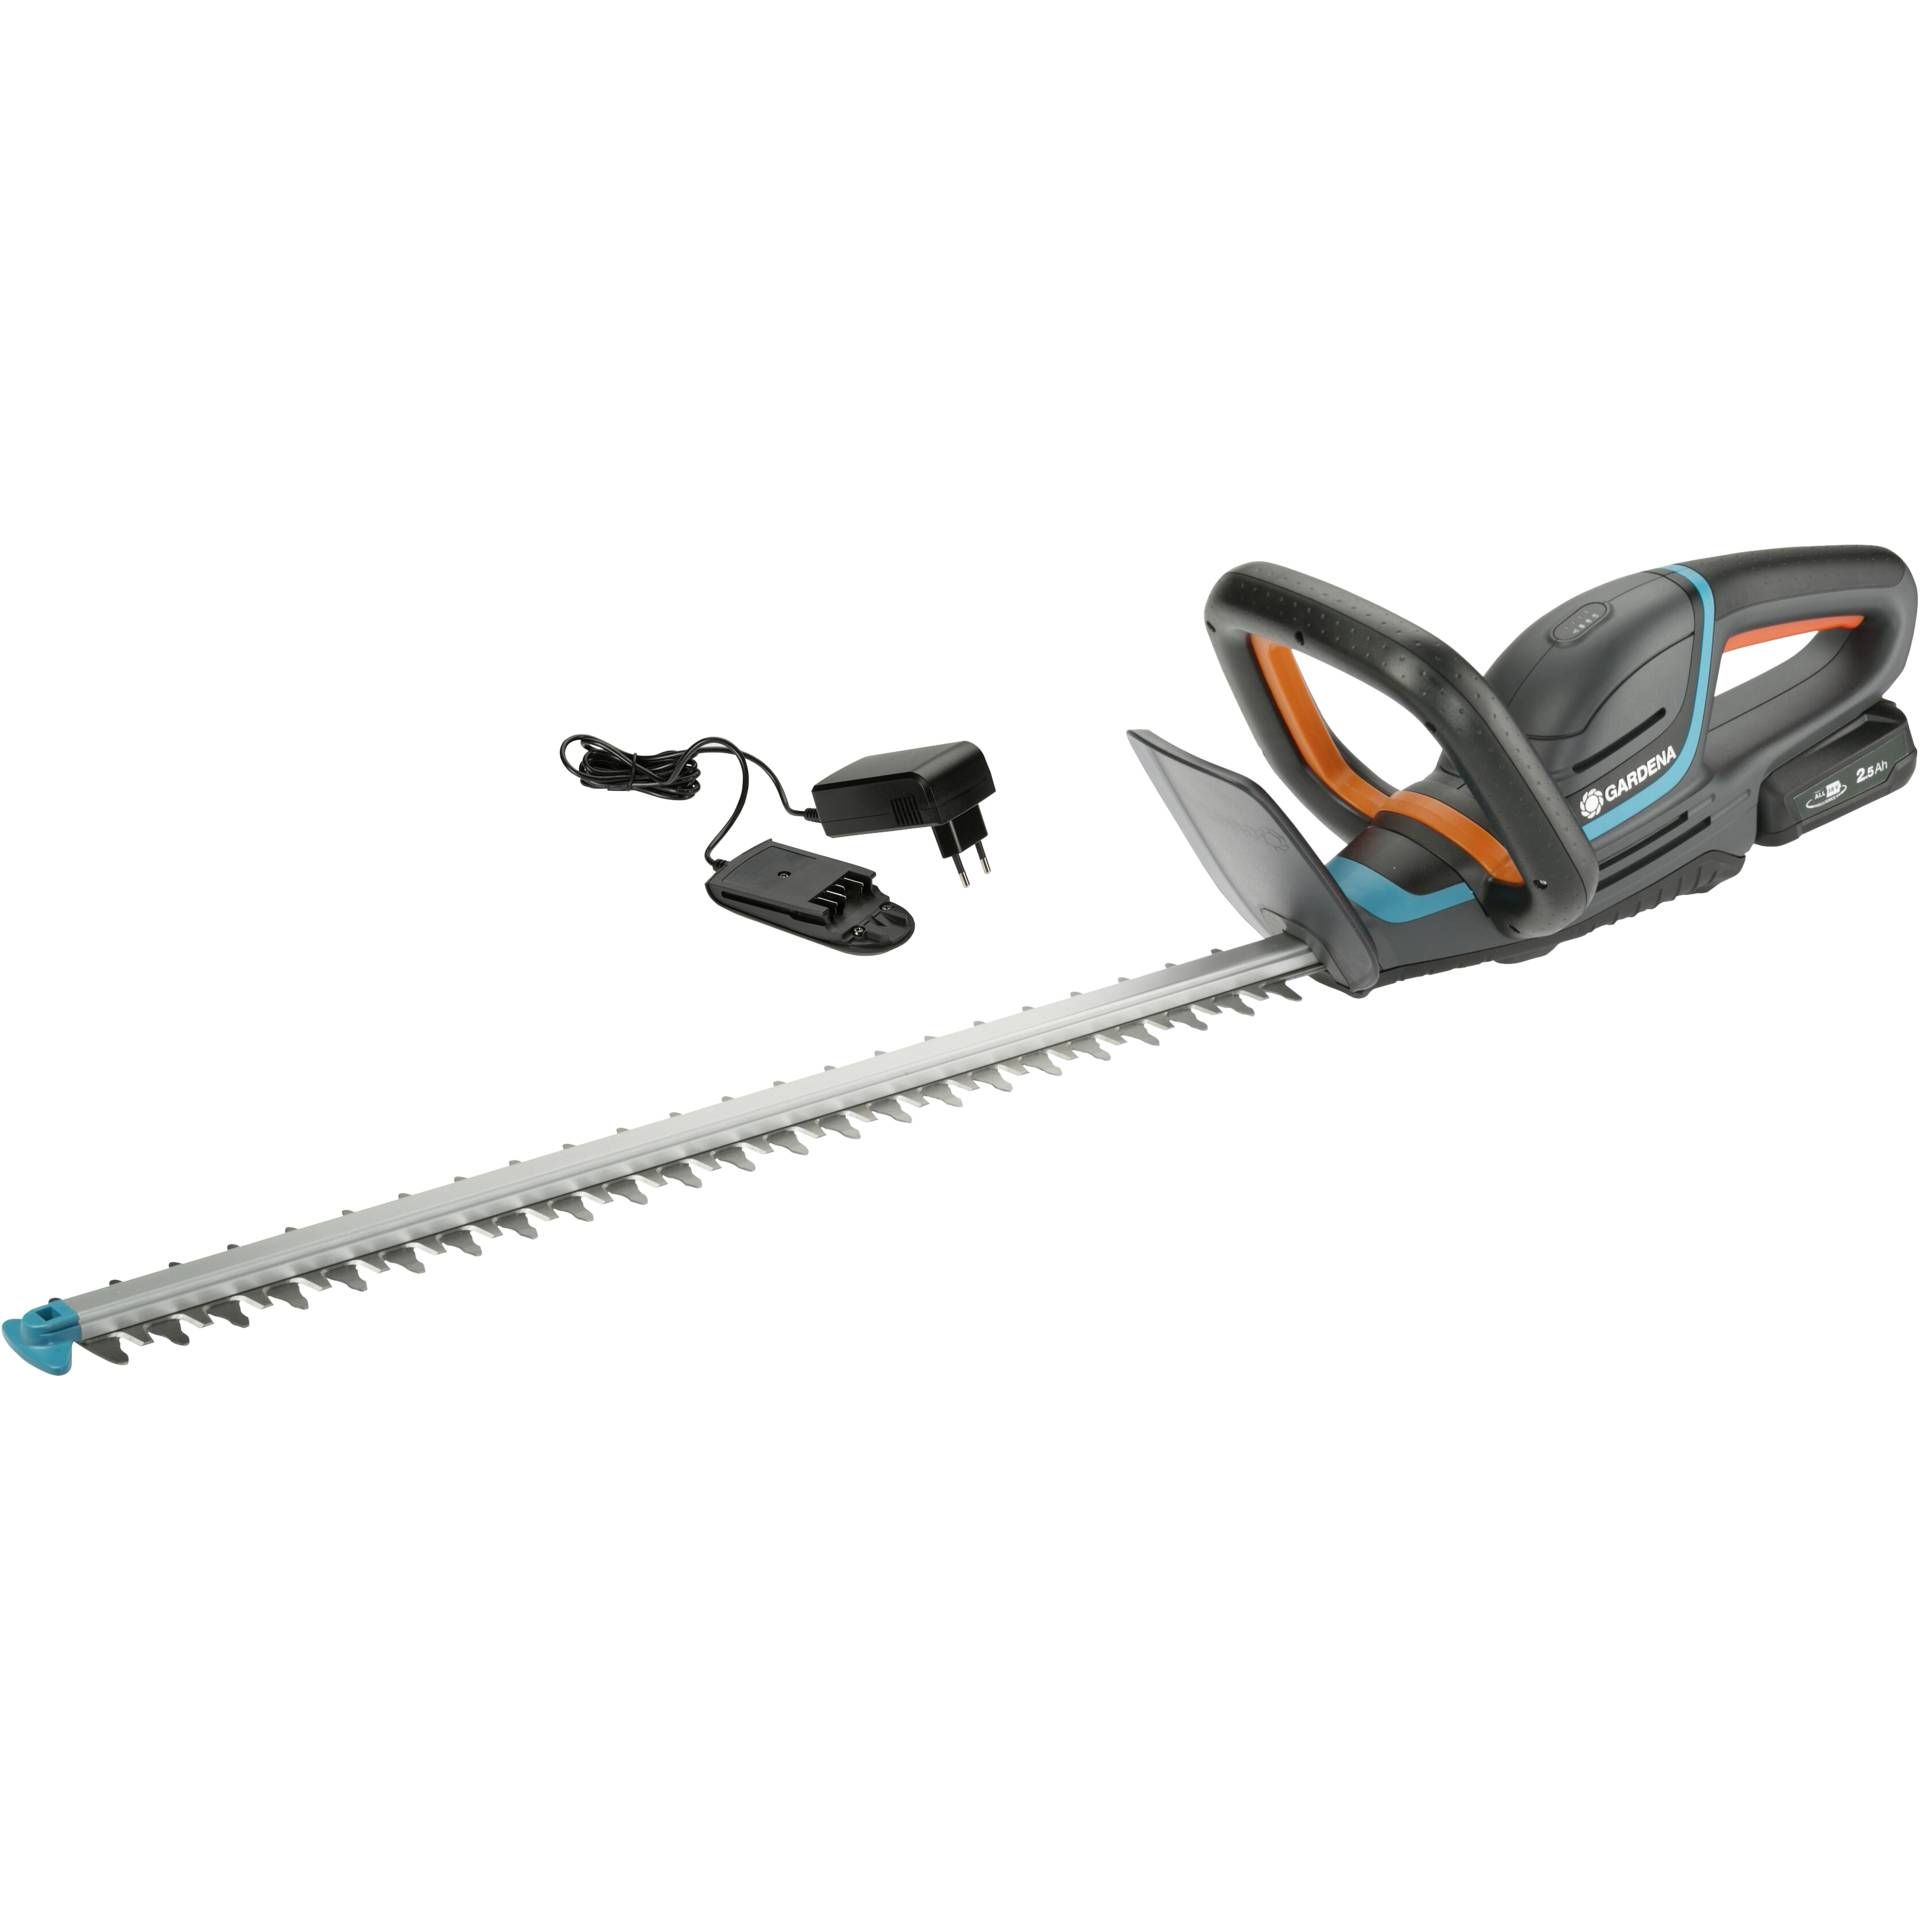 Gardena Hedge Trimmer Comfort Cut, 60 18V-P4A Ready-To-Use S